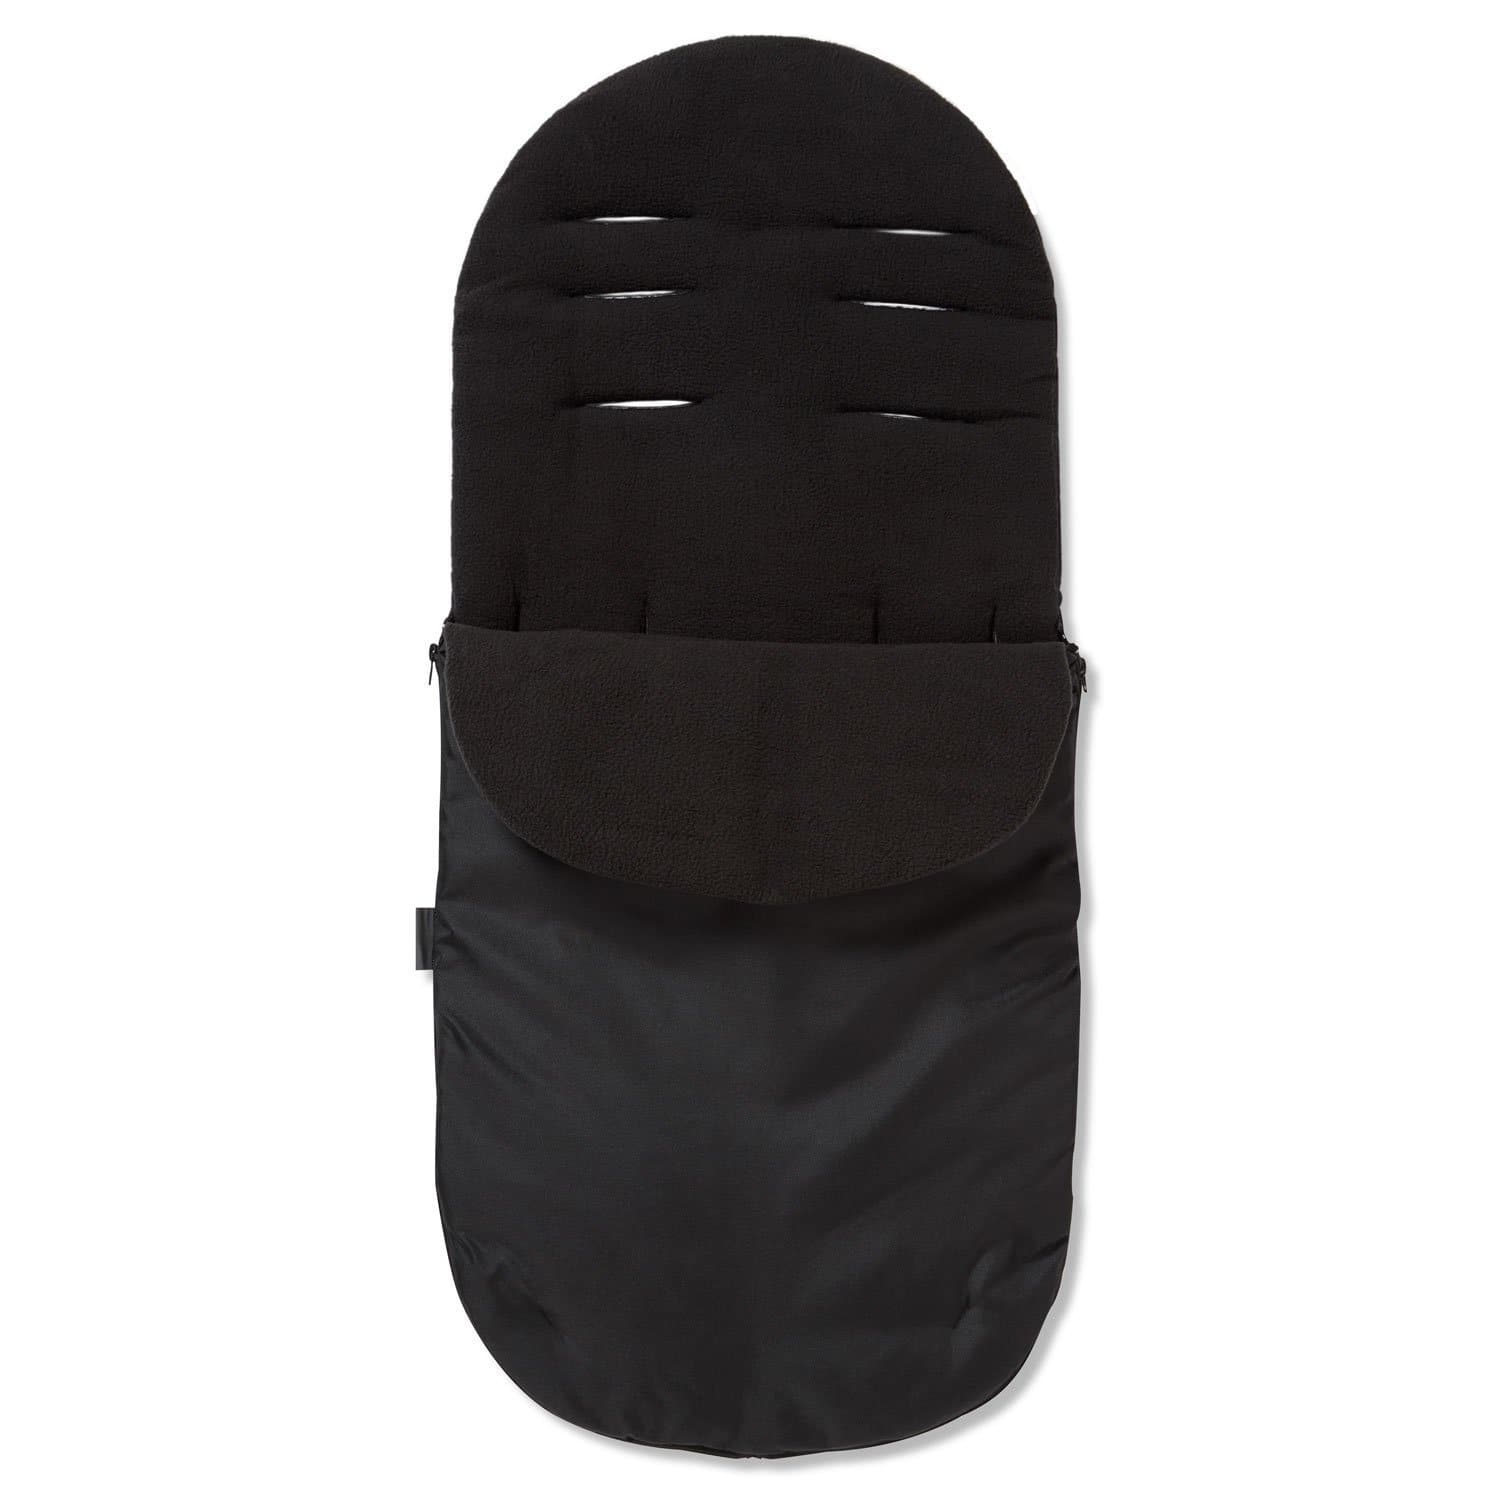 Footmuff / Cosy Toes Compatible with Kids Kargo - Black / Fits All Models | For Your Little One